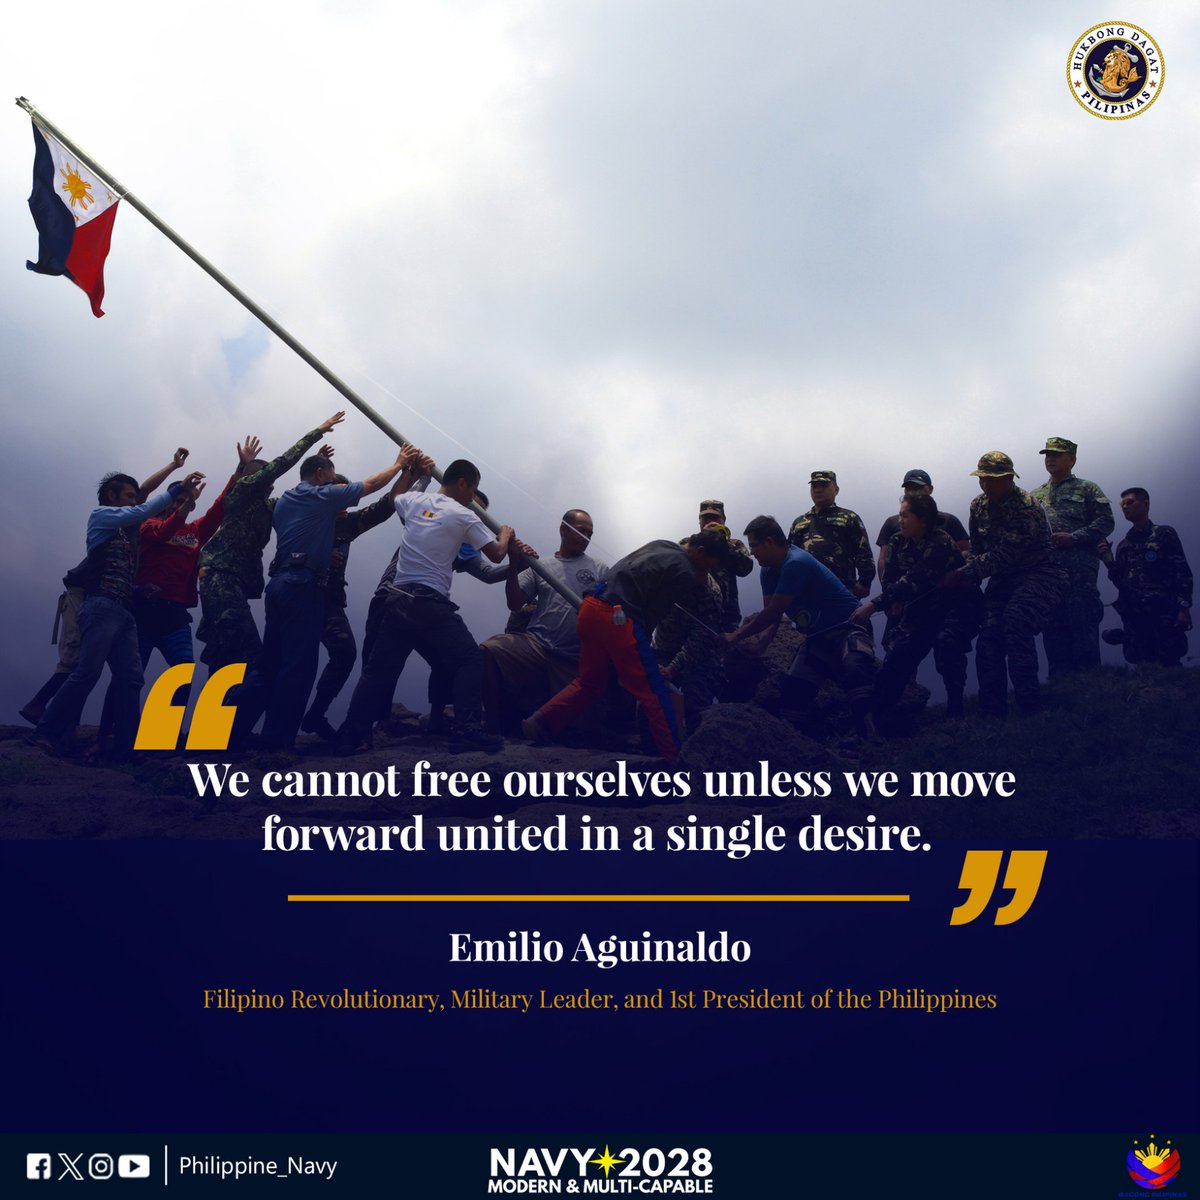 READ | The @Philippine_Navy's Leadership Quote for the Week. #ProtectingtheSeasSecuringOurFuture #ModernandMultiCapablePHNavy #AFPyoucanTRUST